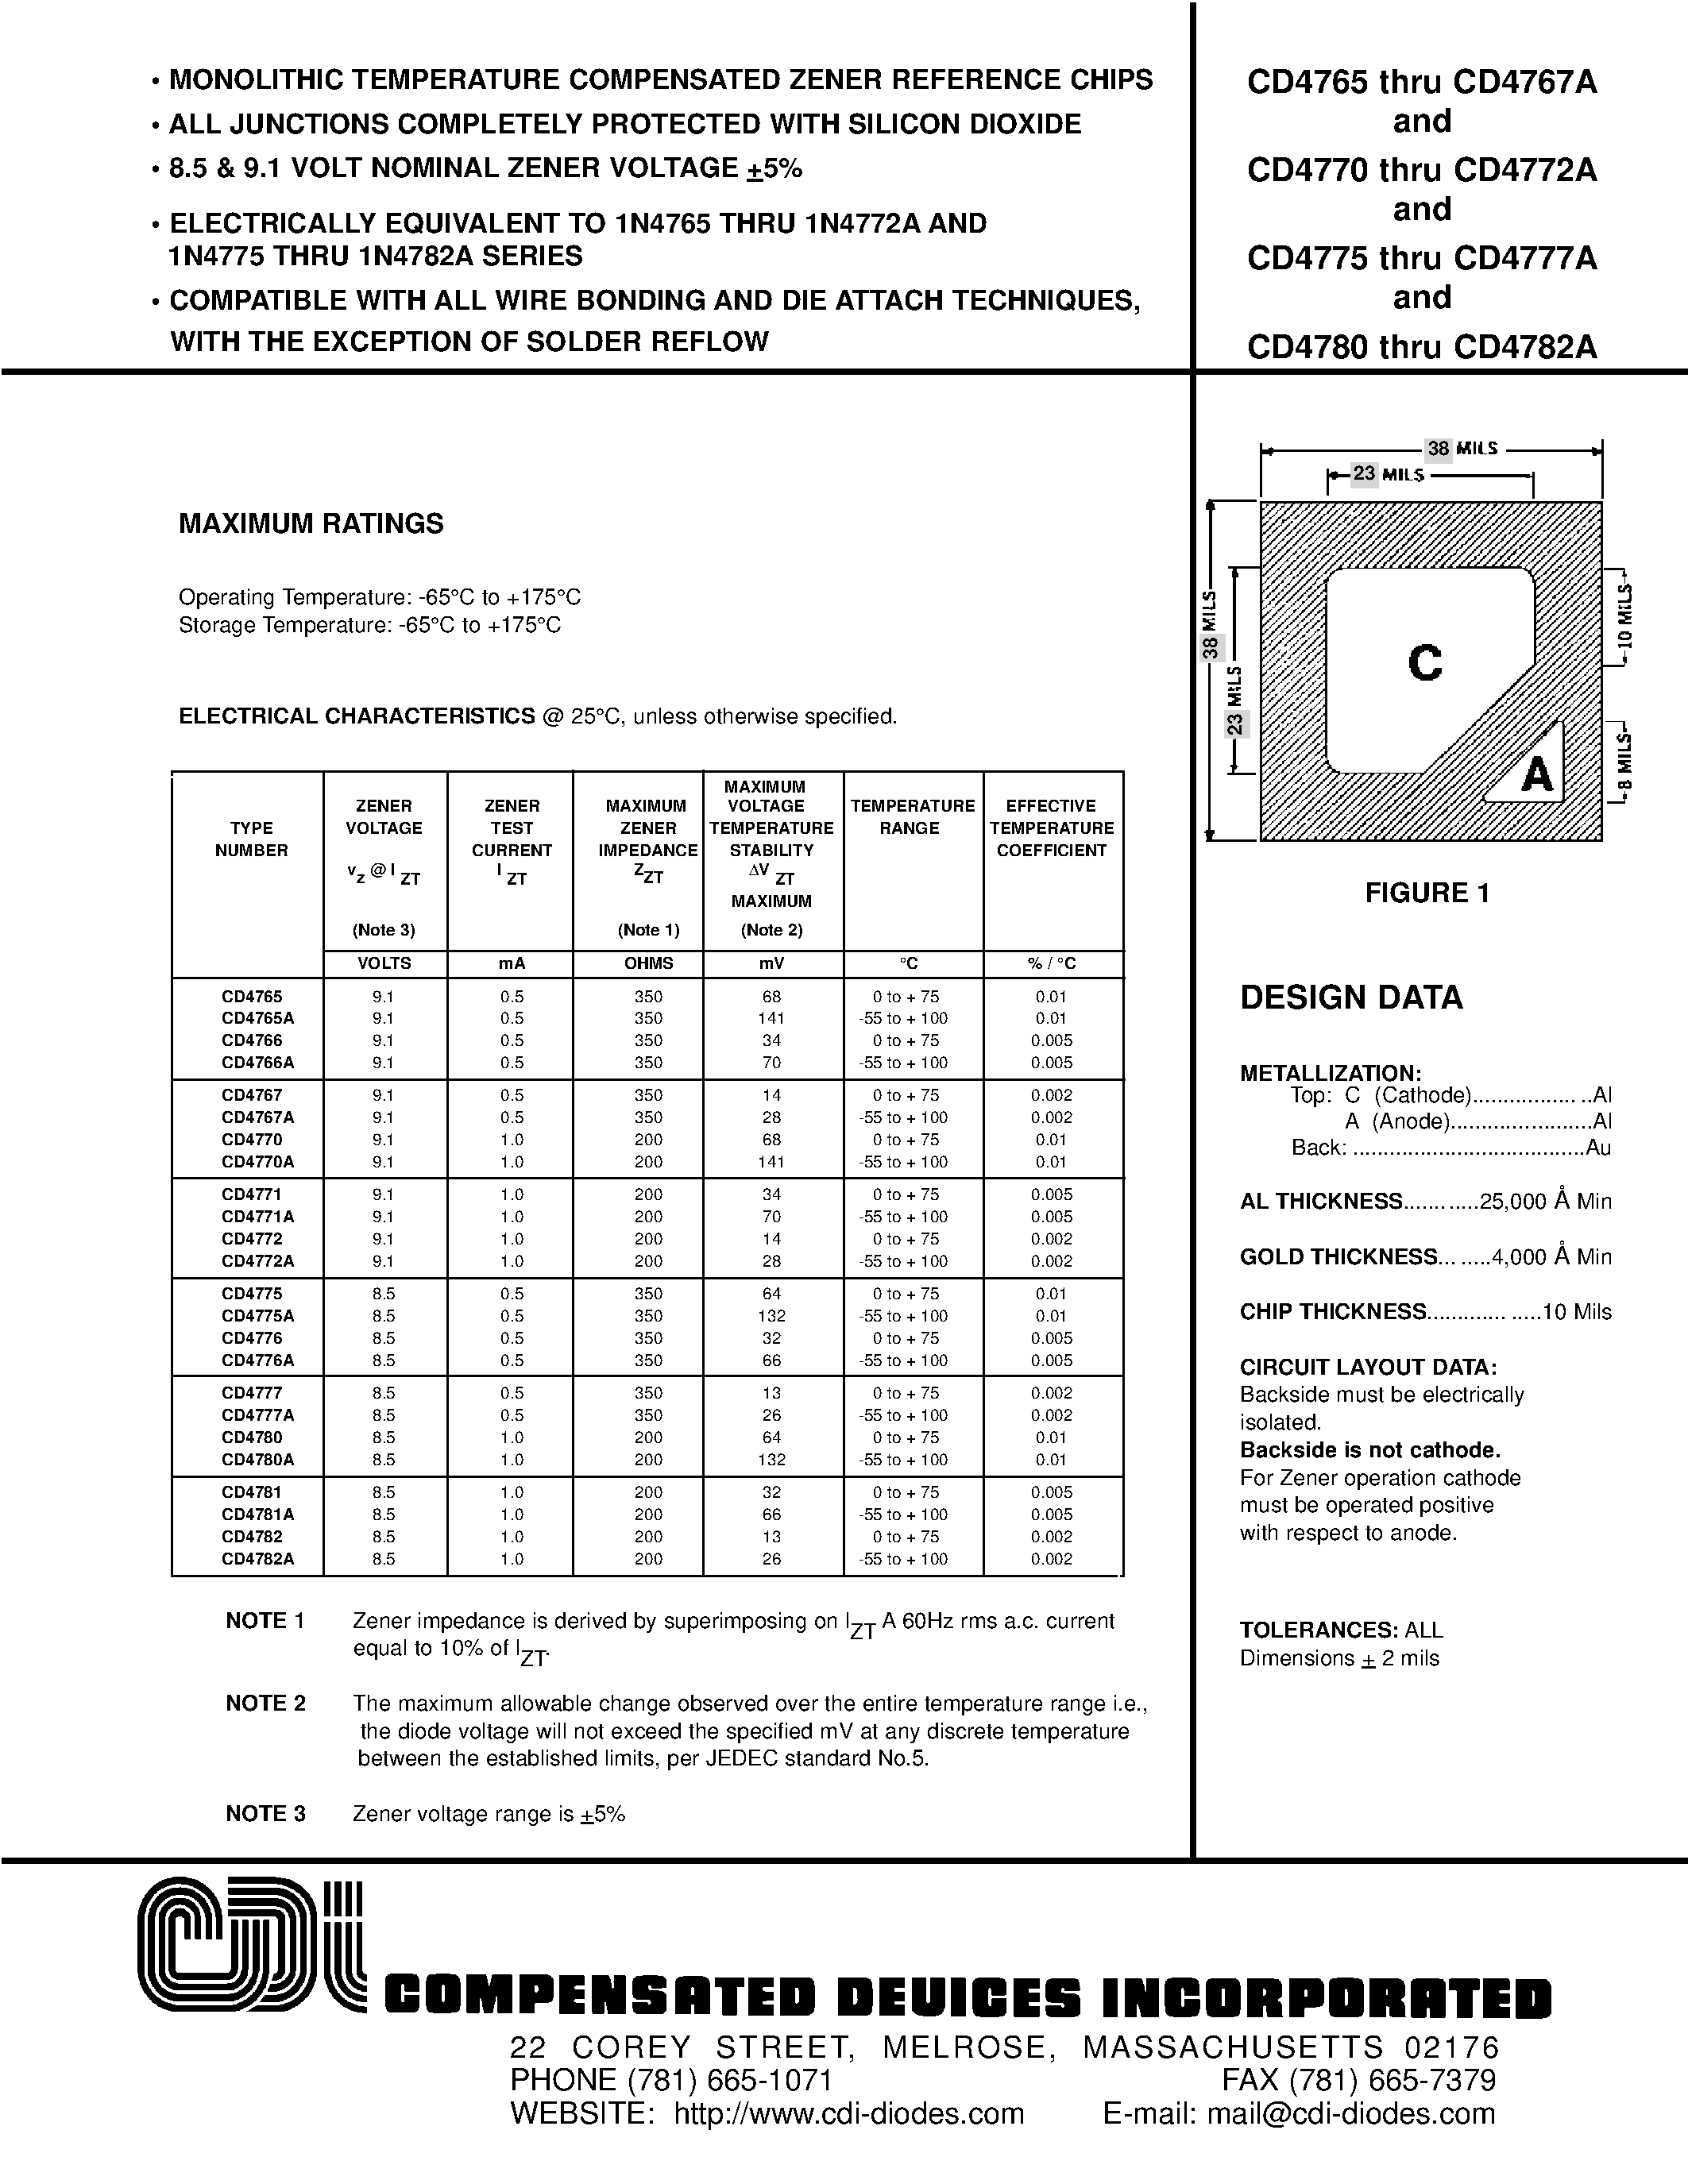 Datasheet CD4780 - MONOLITHIC TEMPERATURE COMPENSATED ZENER REFERENCE CHIPS page 1